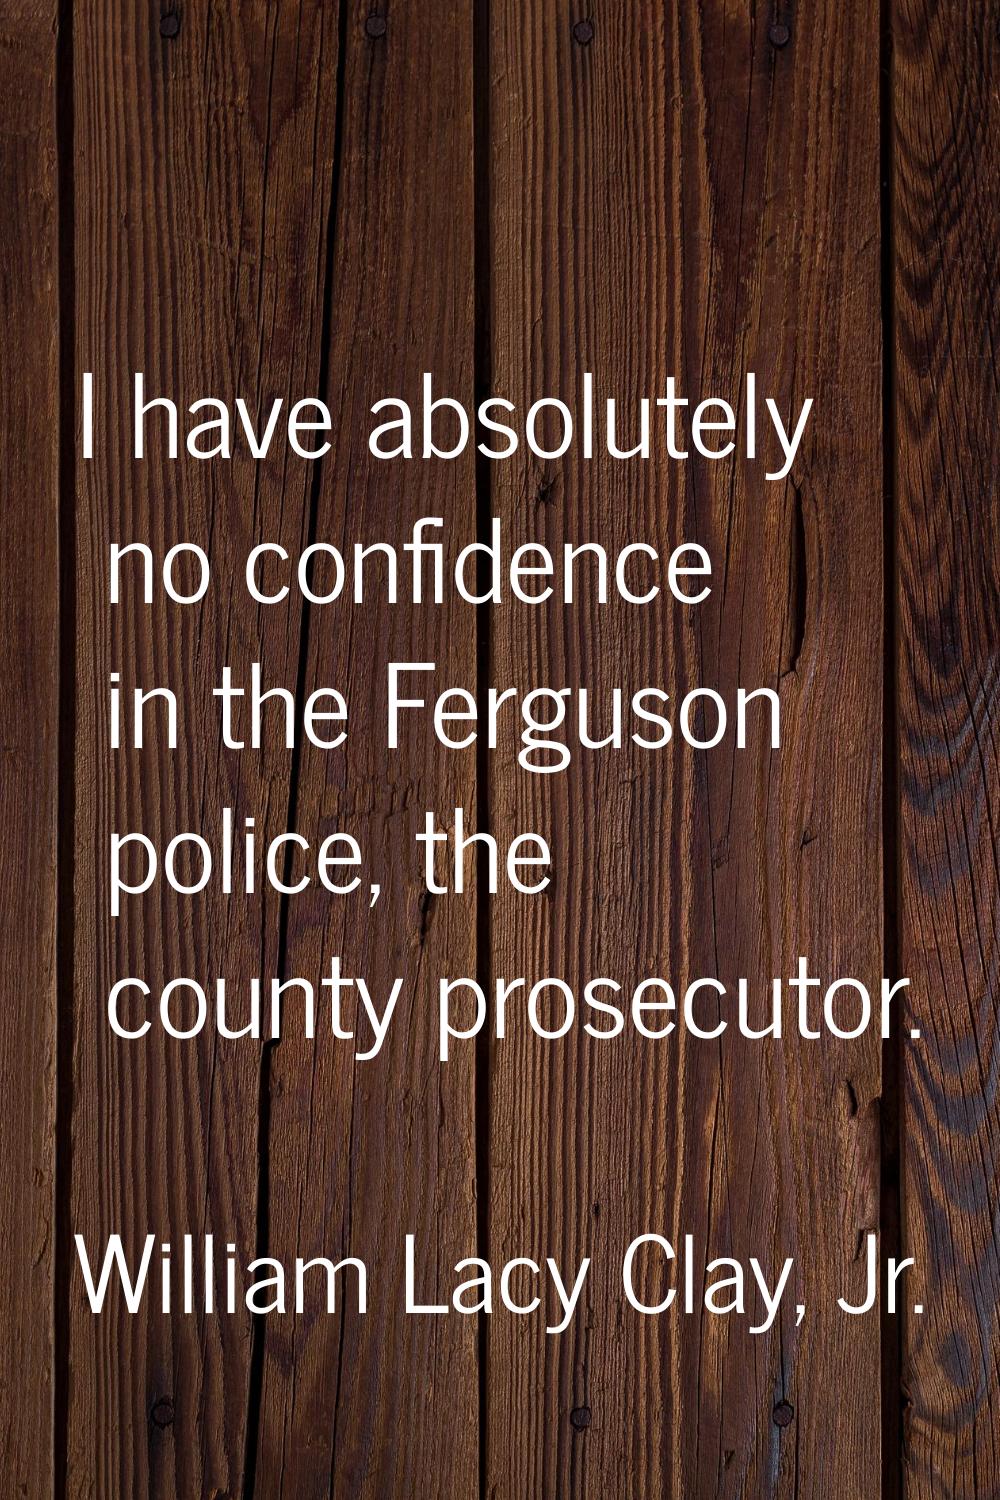 I have absolutely no confidence in the Ferguson police, the county prosecutor.